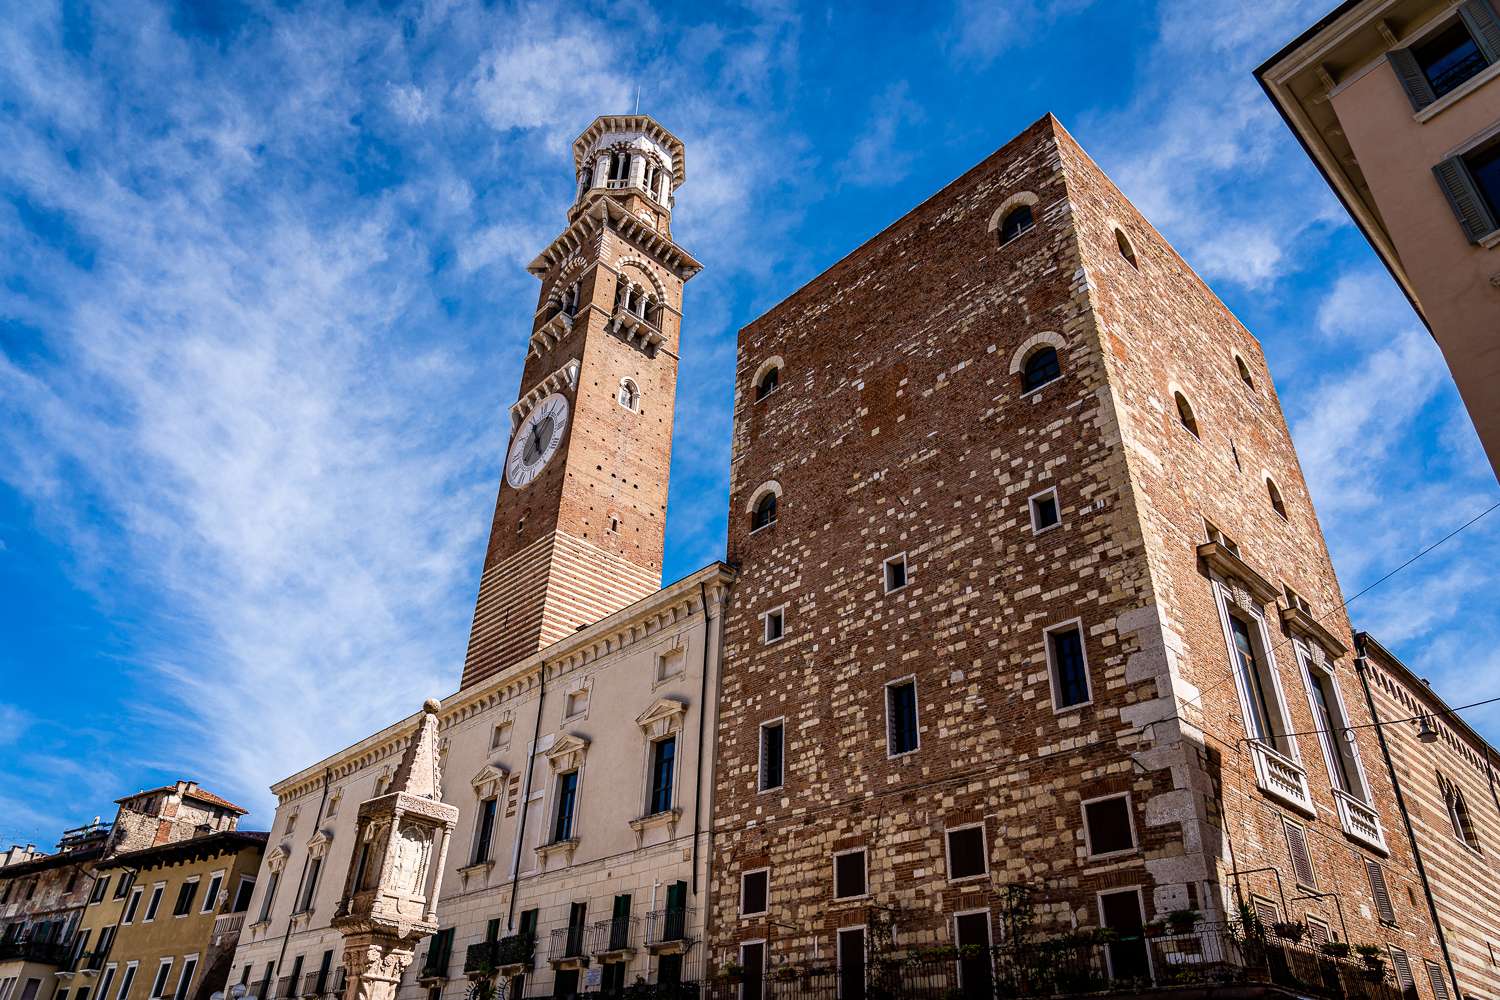 Palace Cansignorio Tower in Verona, Italy